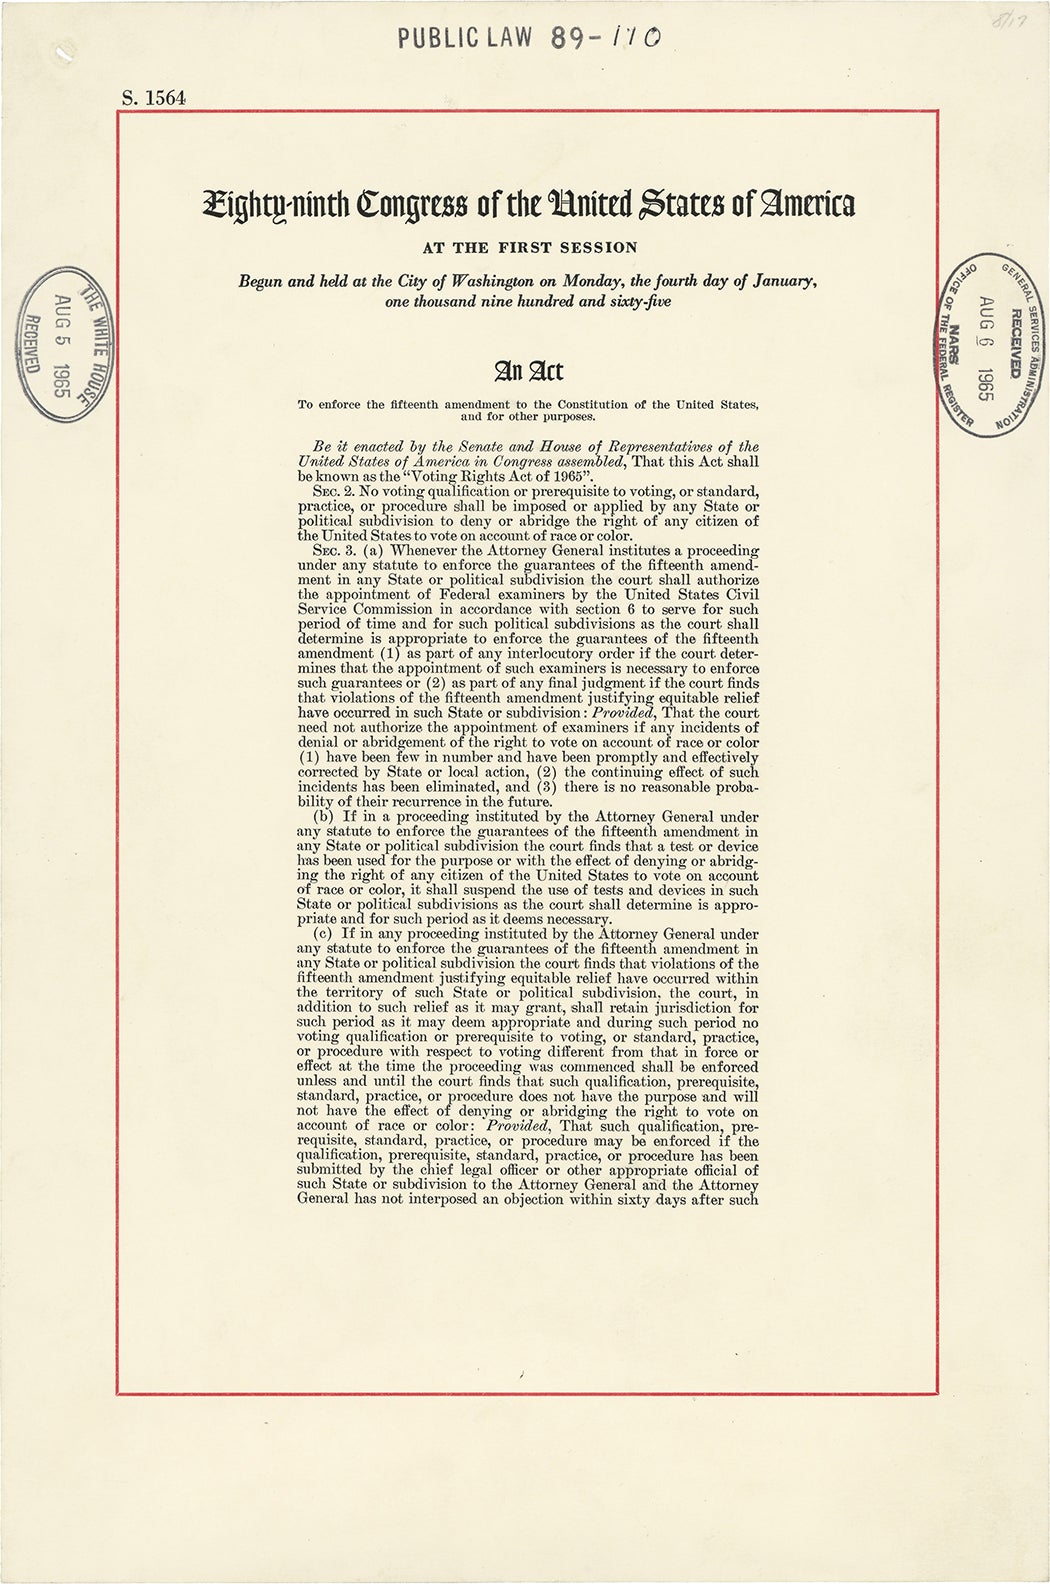 The first page of the Voting Rights Act